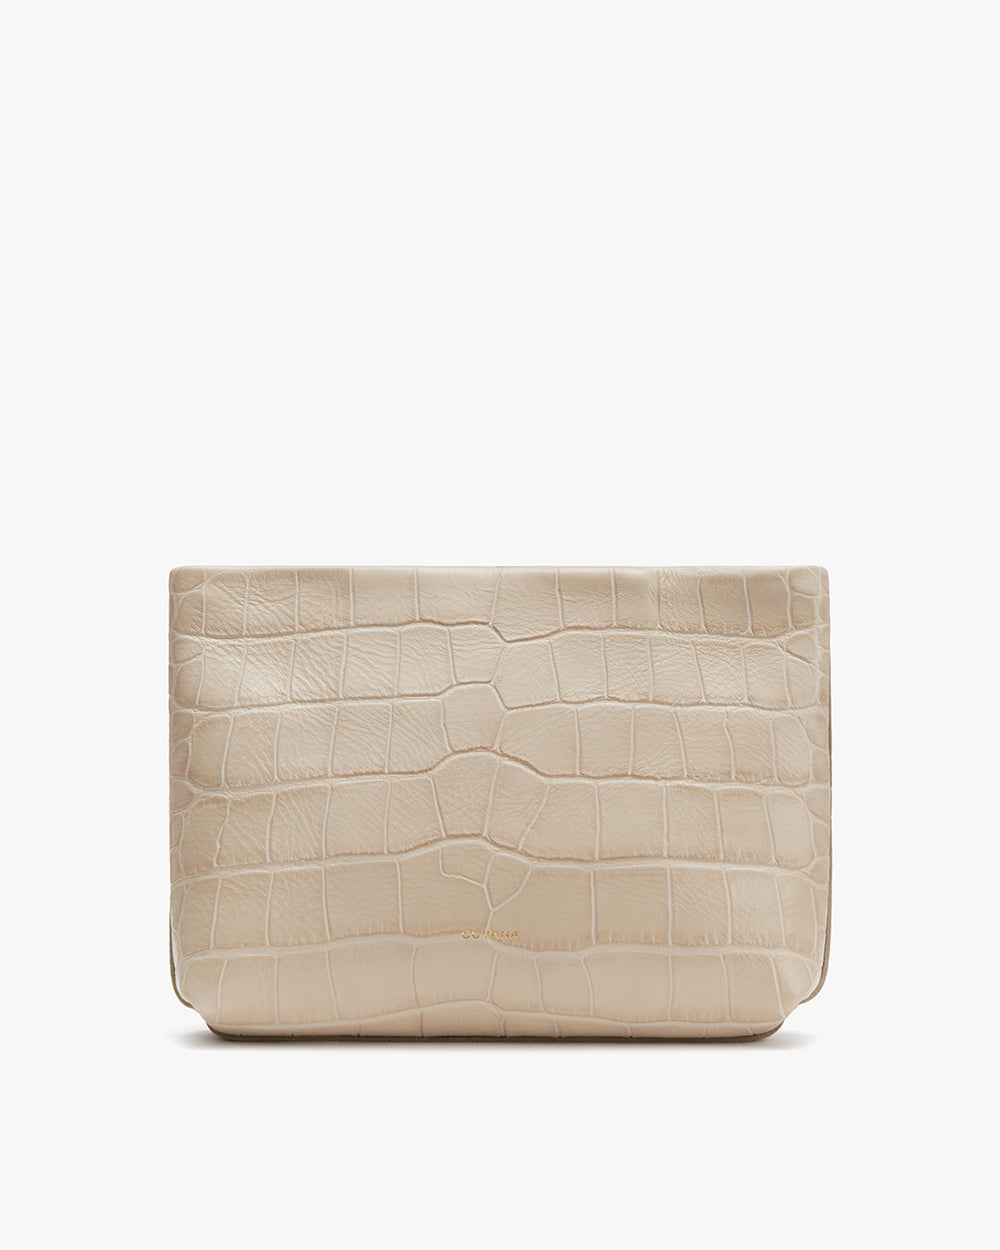 Clutch with fold-over top and textured exterior.